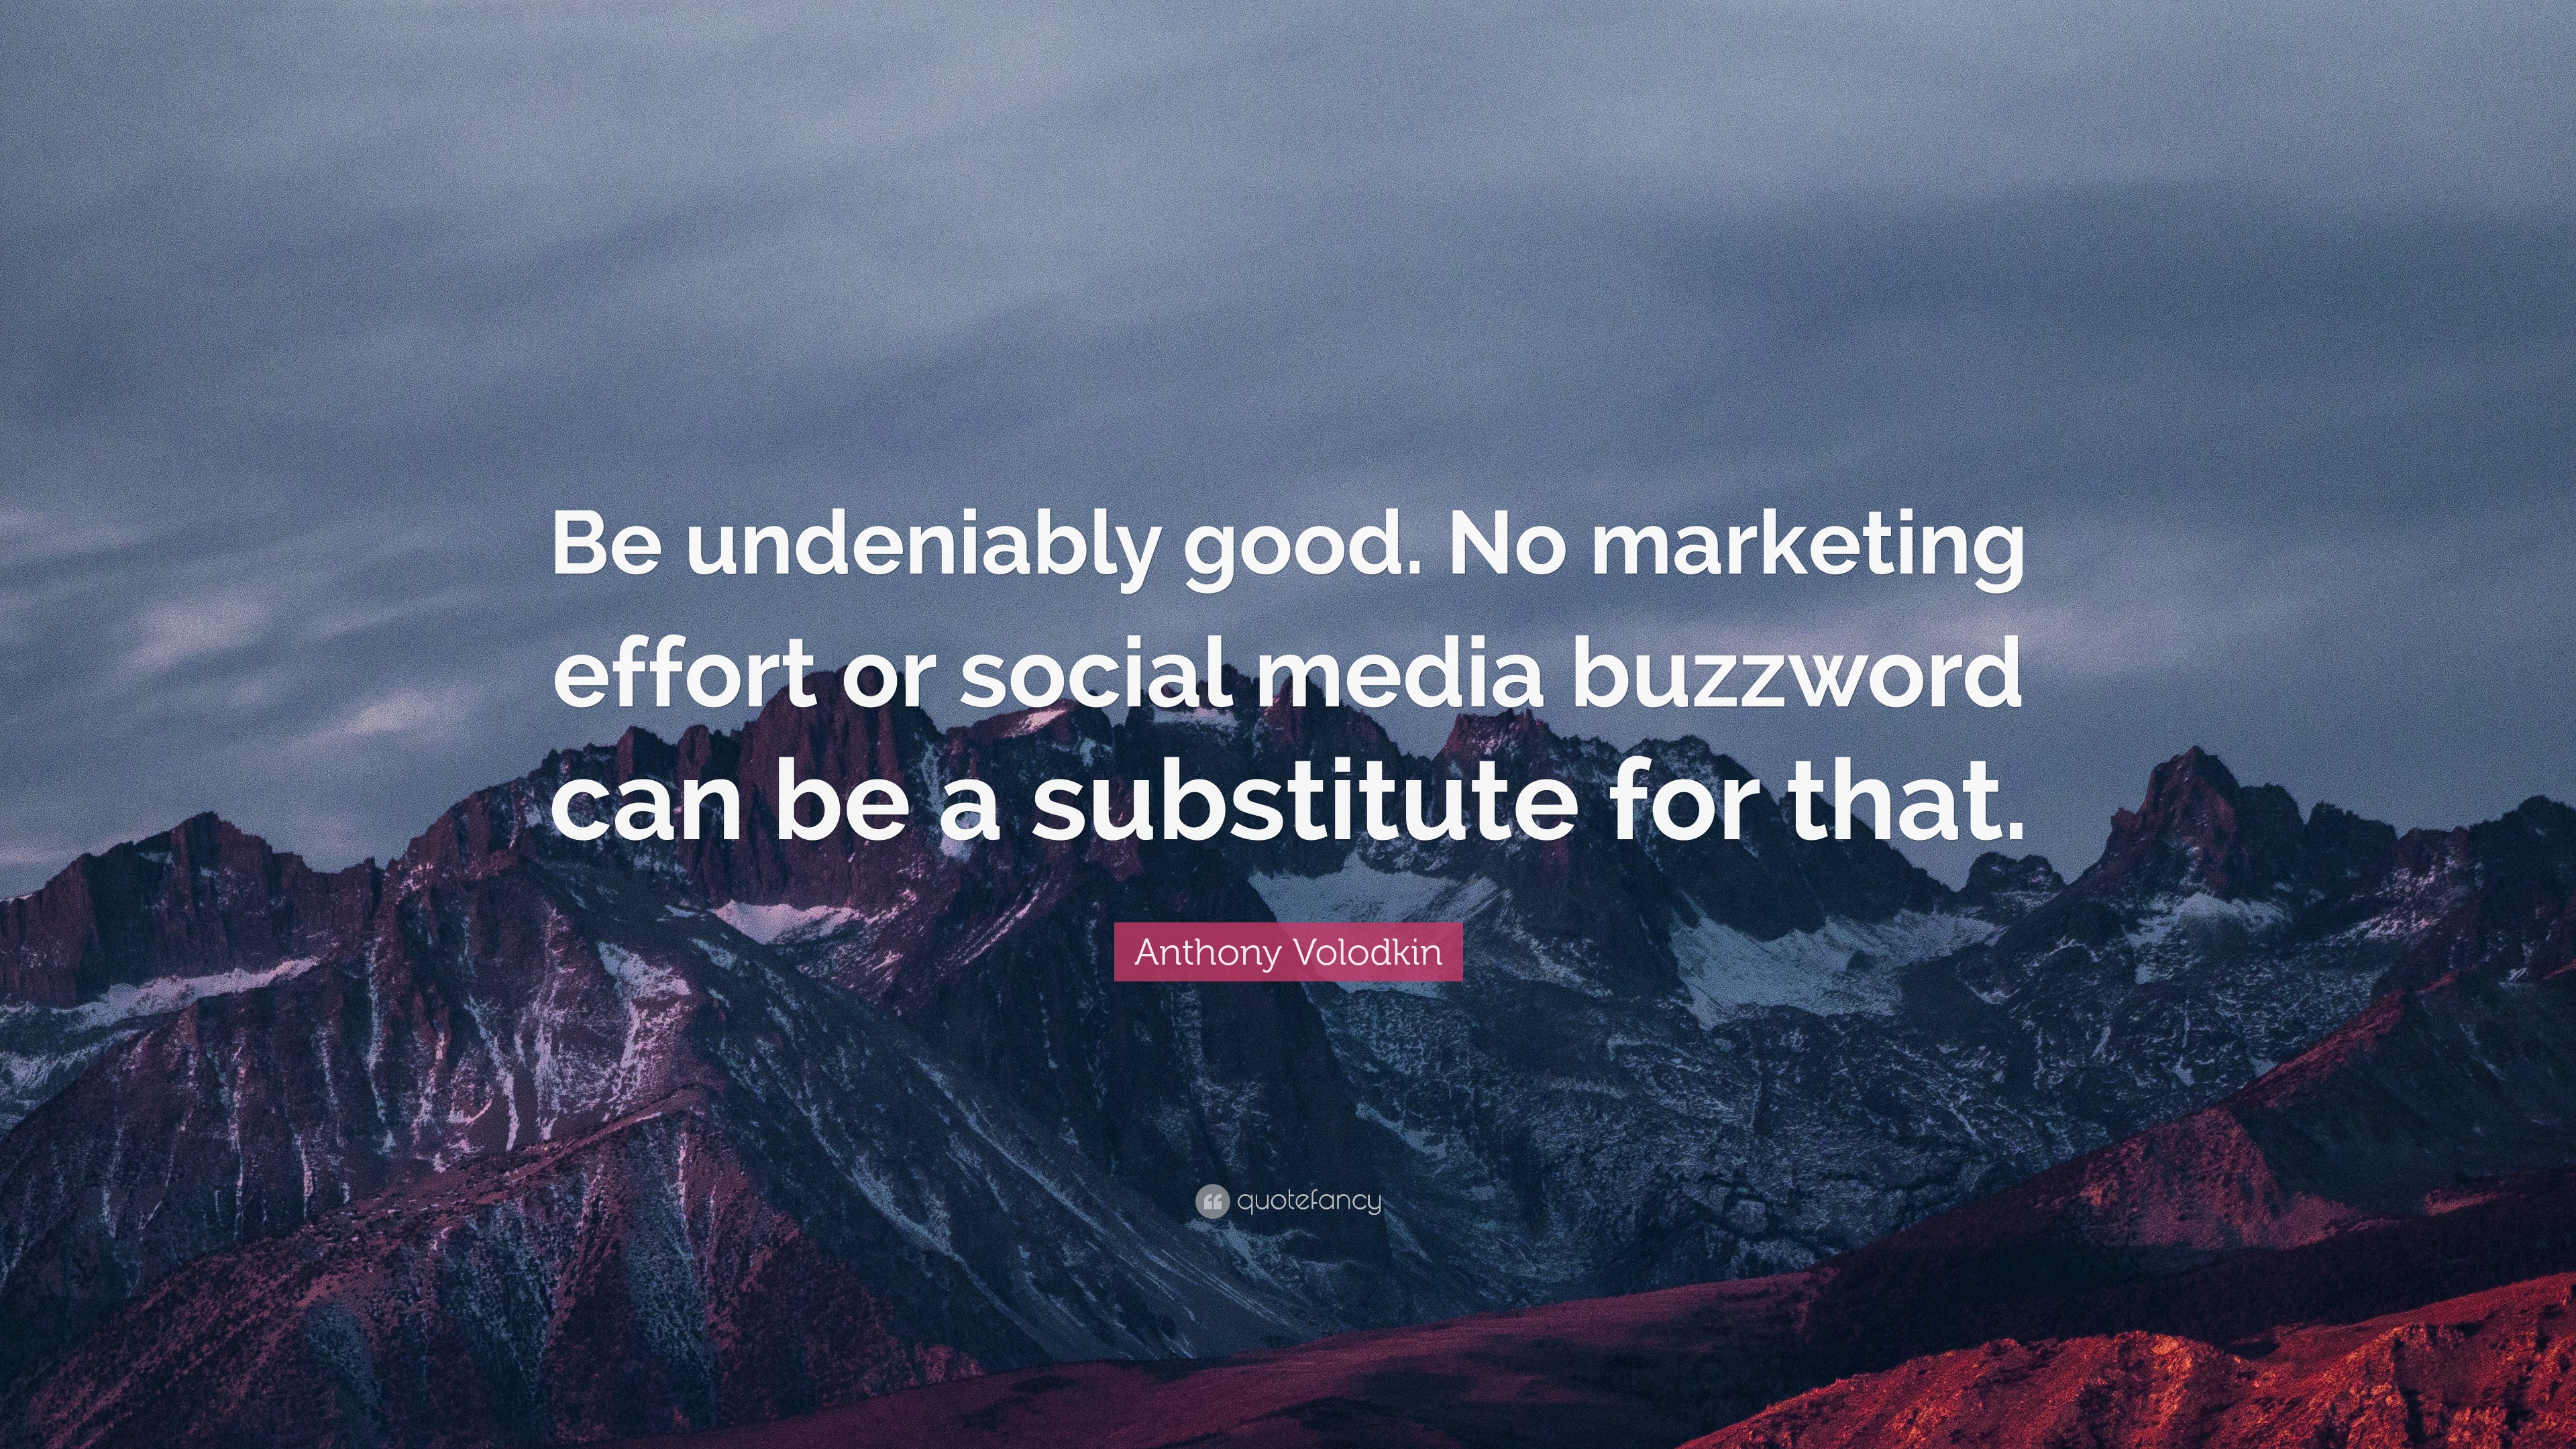 Anthony Volodkin Quote: “Be undeniably good. No marketing effort or ...